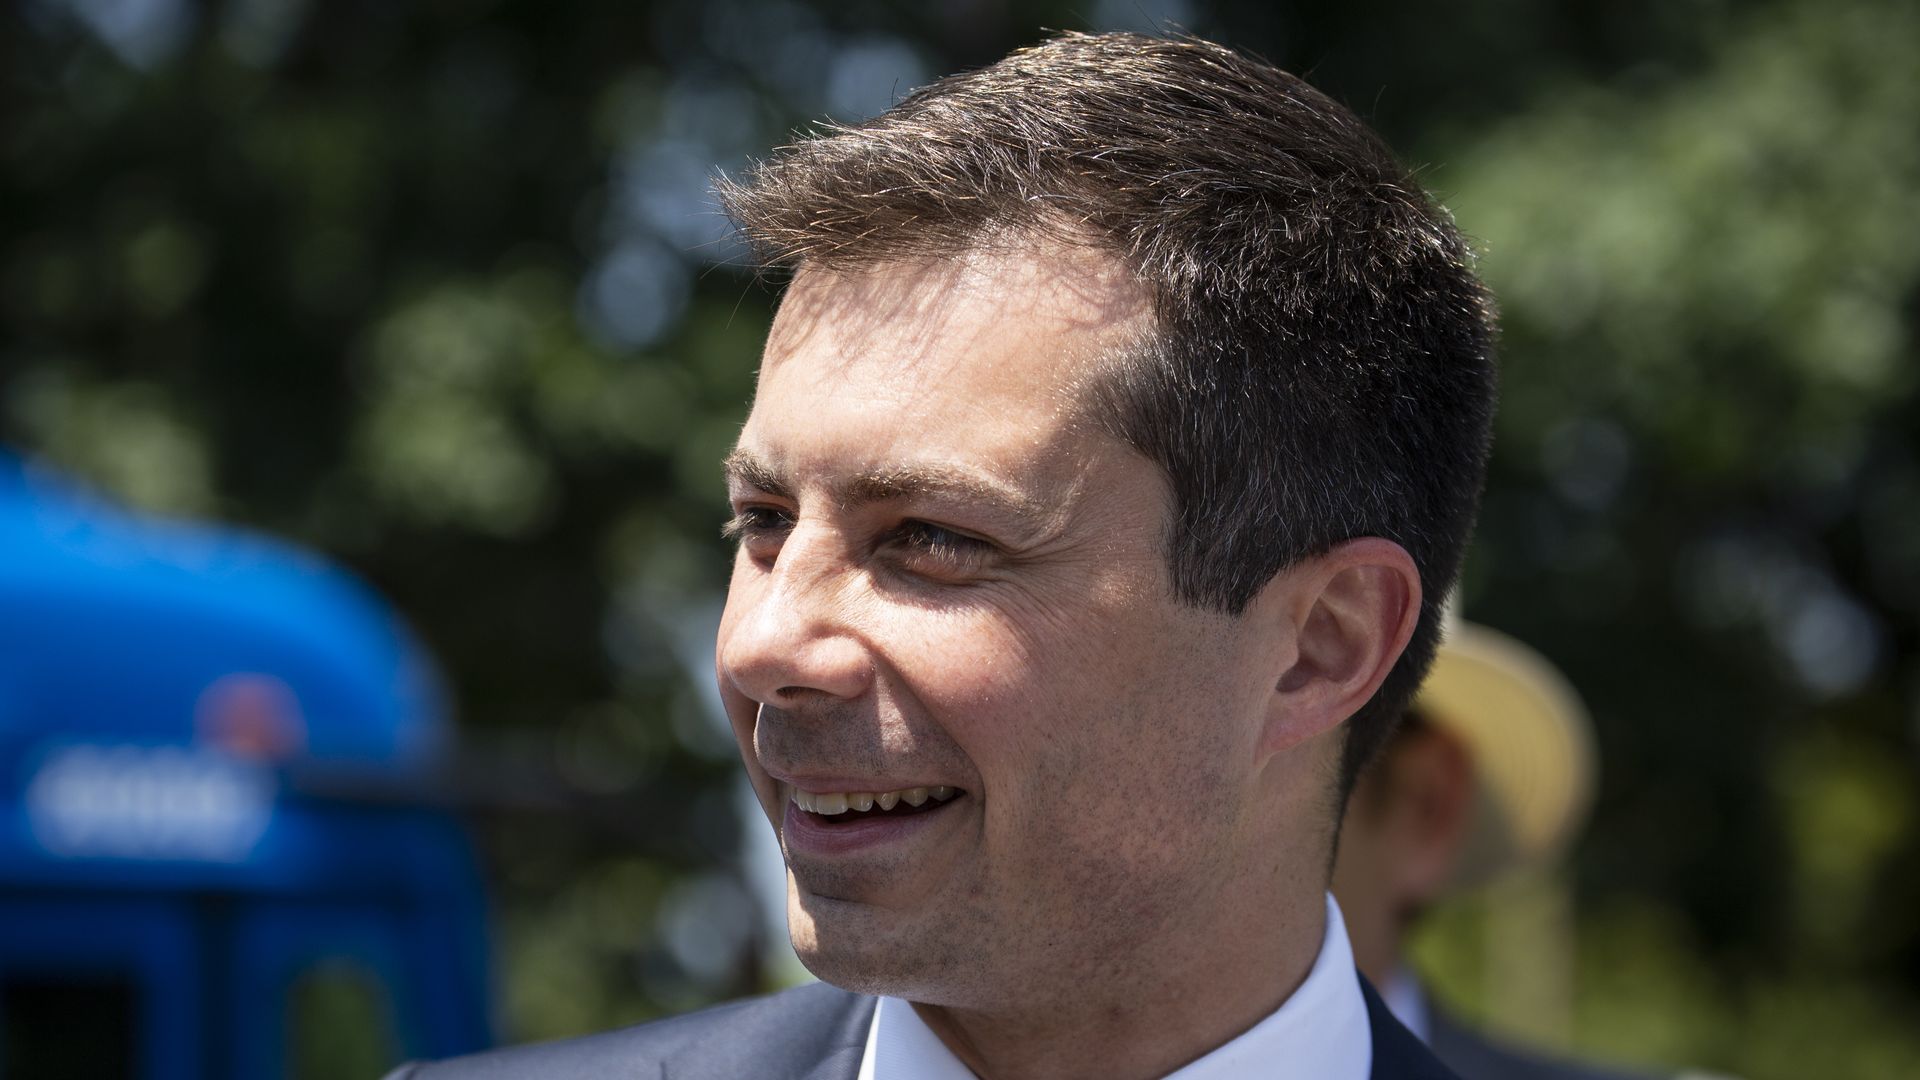 U.S. Transportation Secretary Pete Buttigieg, wearing a blue suit, blue dotted tie and white shirt, smiles as he looks to the right of the camera.